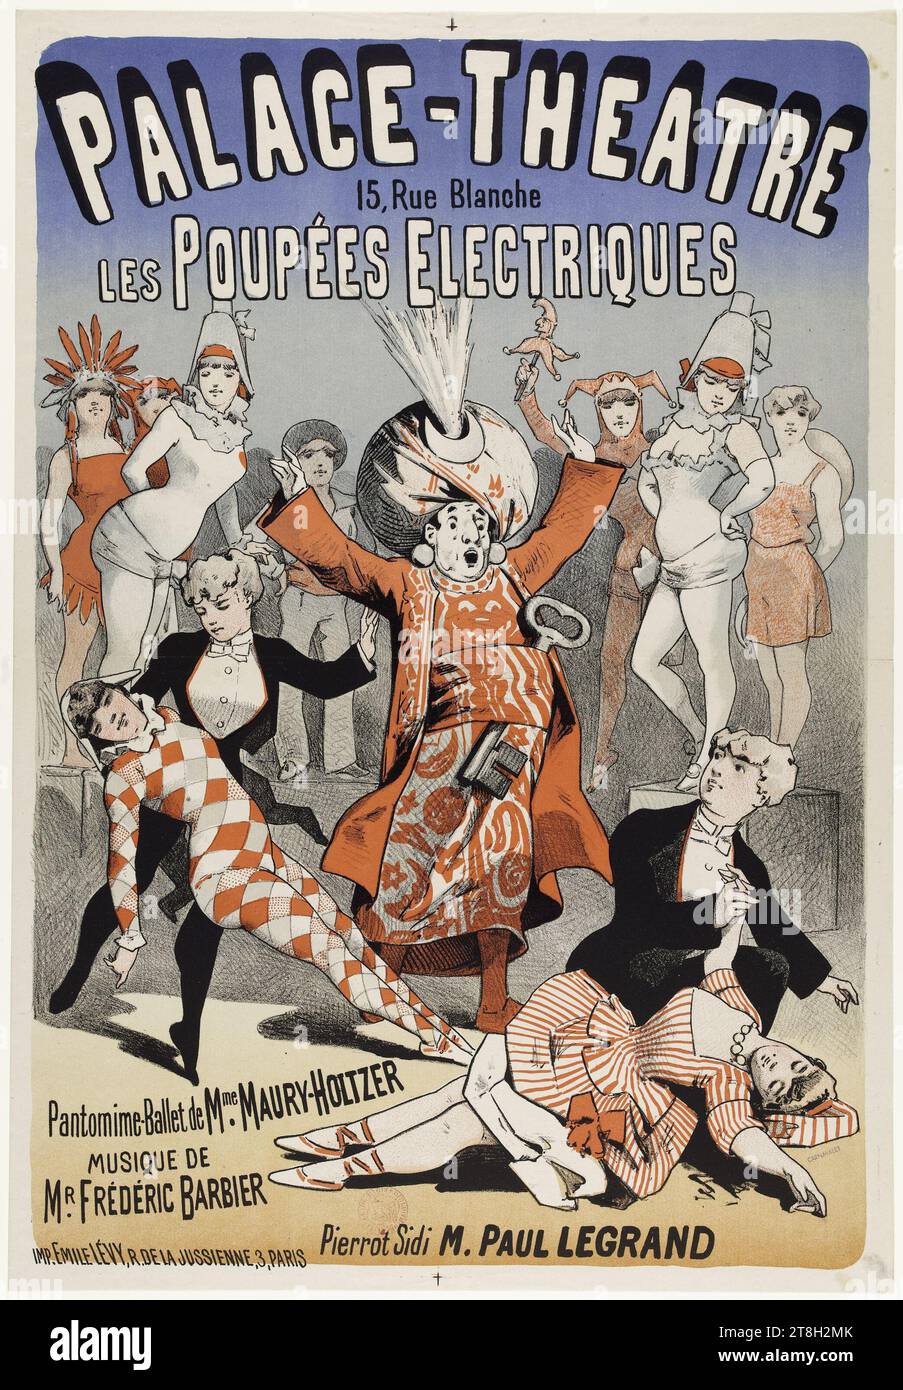 PALACE-THEATRE, 15, Rue Blanche, ELECTRIC DOLLS, Pantomime-Ballet by Mme MAURY-HOLTZER, MUSIC BY, MR. FREDERIC BARBIER, Pierrot Sidi M. PAUL LEGRAND, Draftsman, Lévy, Emile, Printer, In 1883, Graphic arts, Manuscripts, prints, binding, Poster, Lithography, Dimensions - Work: Height: 58.6 cm, Width: 40.4 cm Stock Photo